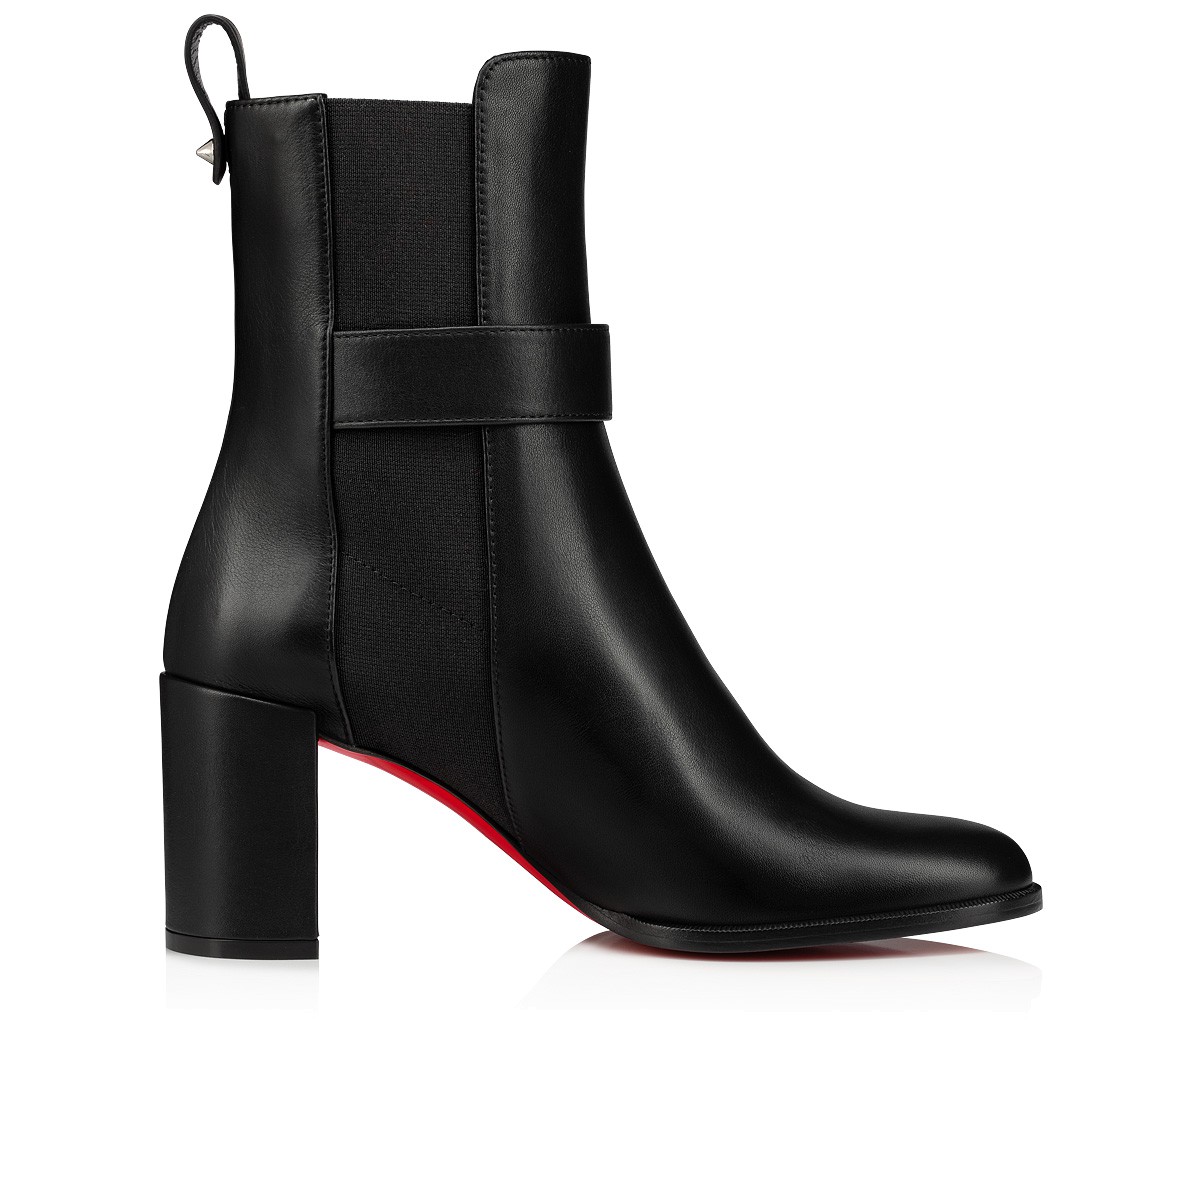 Shoes - Cl Chelsea Booty - Christian Louboutin